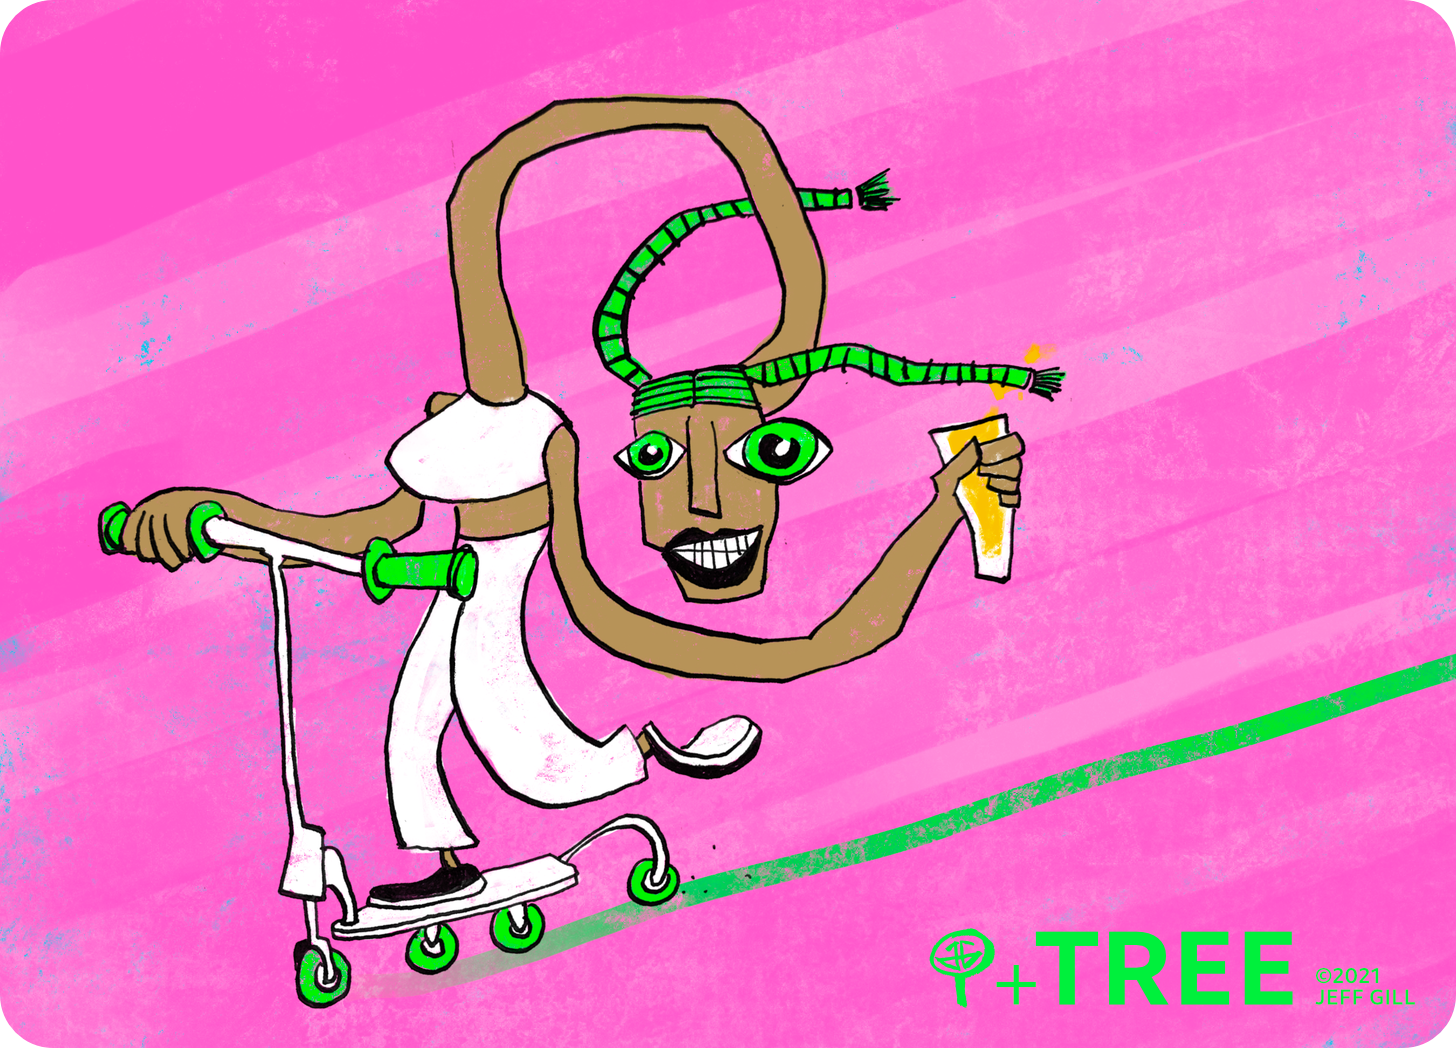 An illustration of a woman with green plaited hair and a long bendy neck looking at the viewer while riding a push scooter and holding a pint of beer, which I assume is a citrussy IPA.